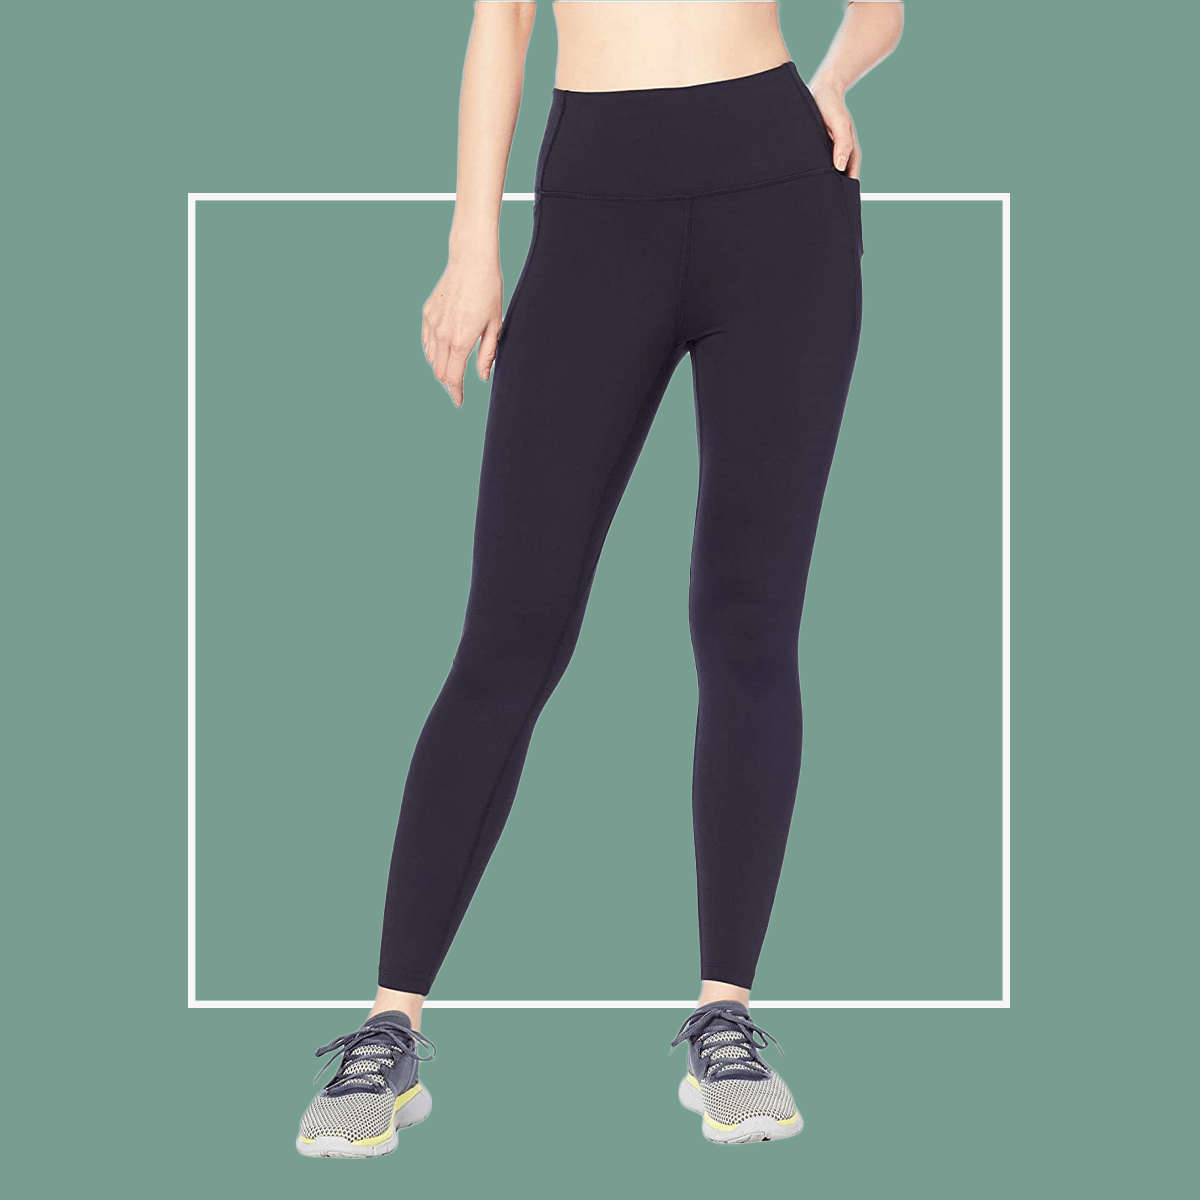 13 Best Leggings for Working Out in Warm Weather 2022 | The Healthy